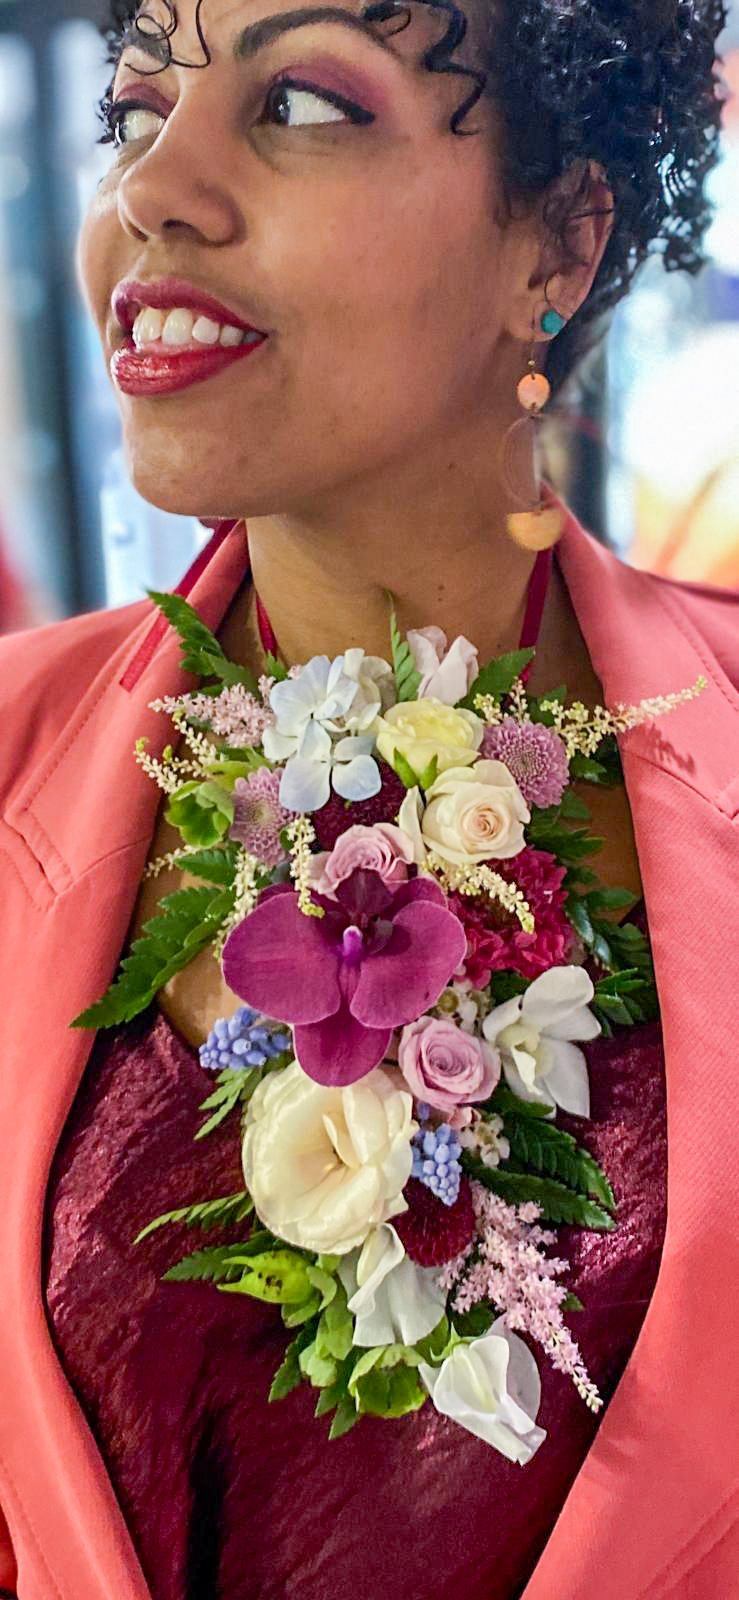 Floral Necklaces for the bridesmaids